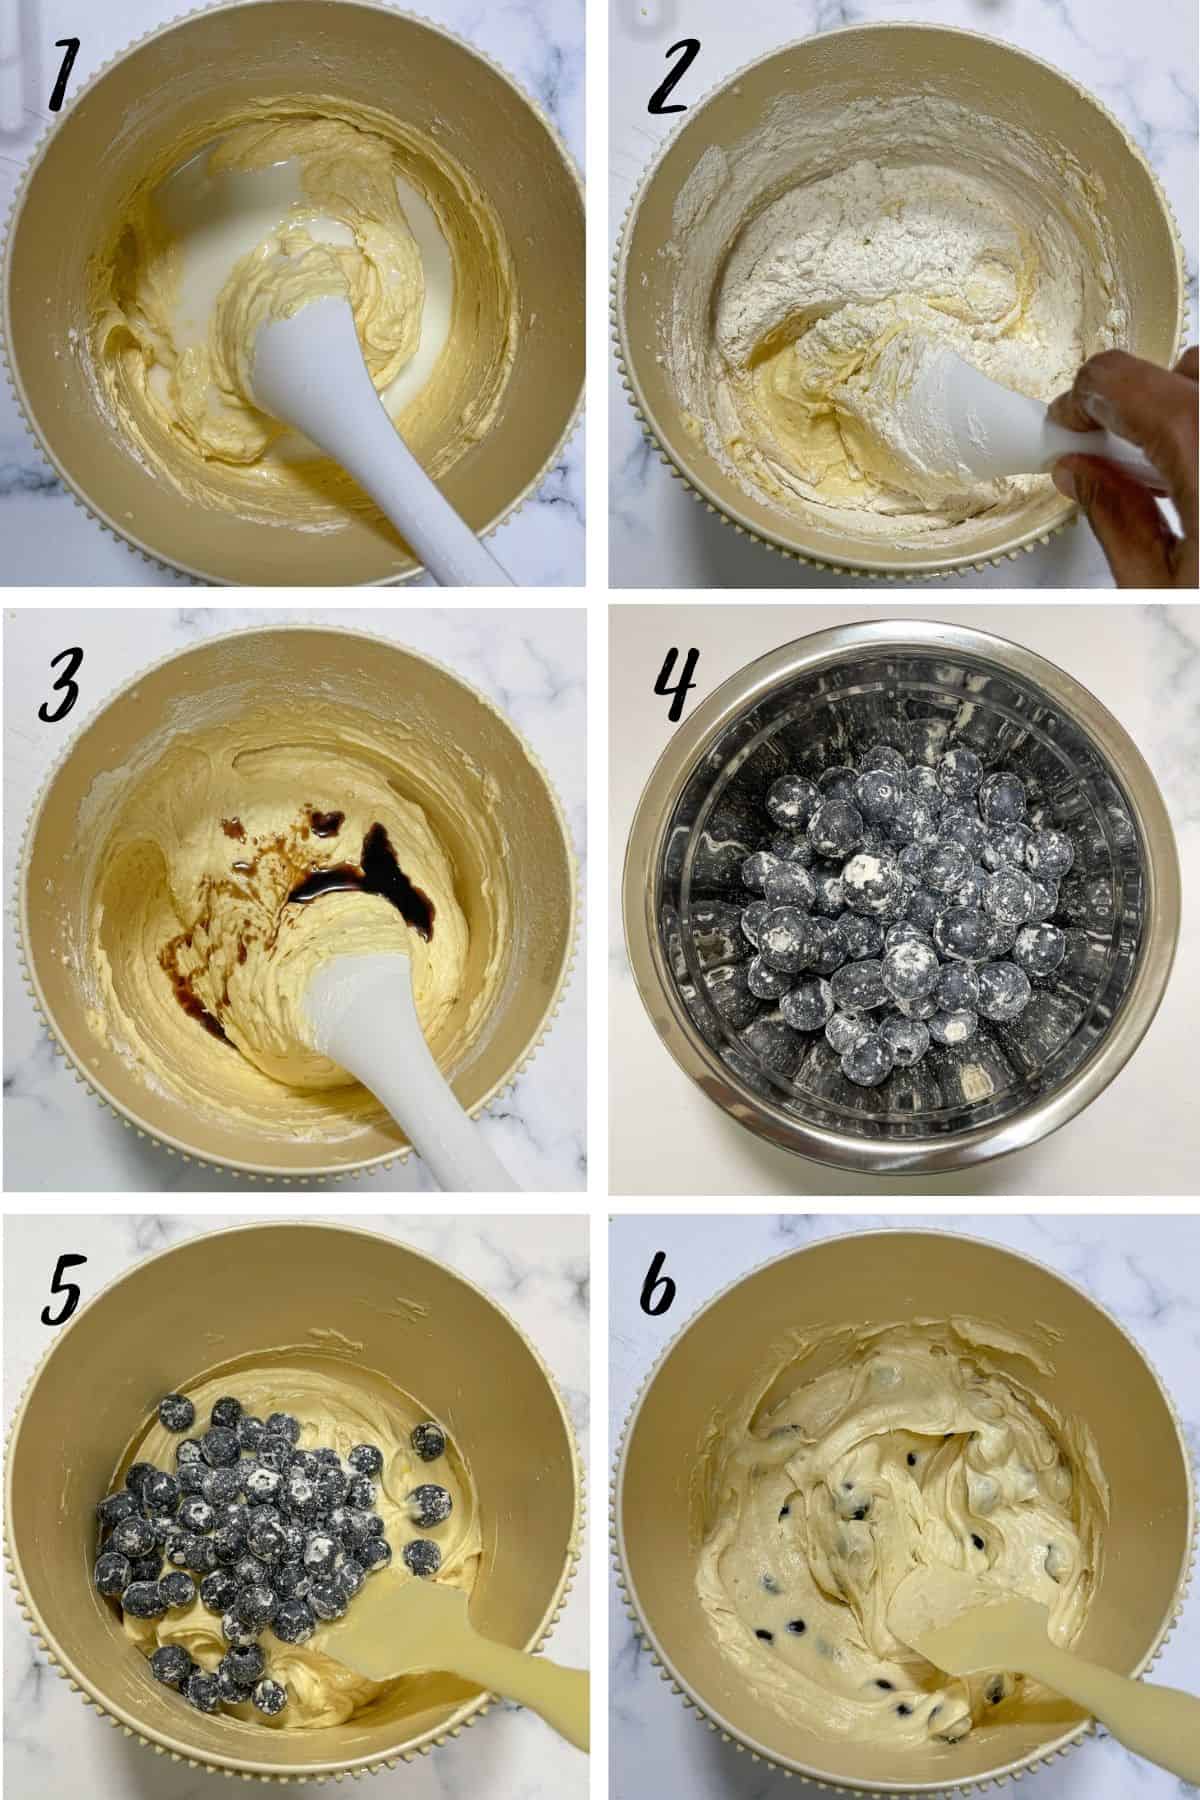 A poster of 6 images showing how to mix blueberries into cake batter